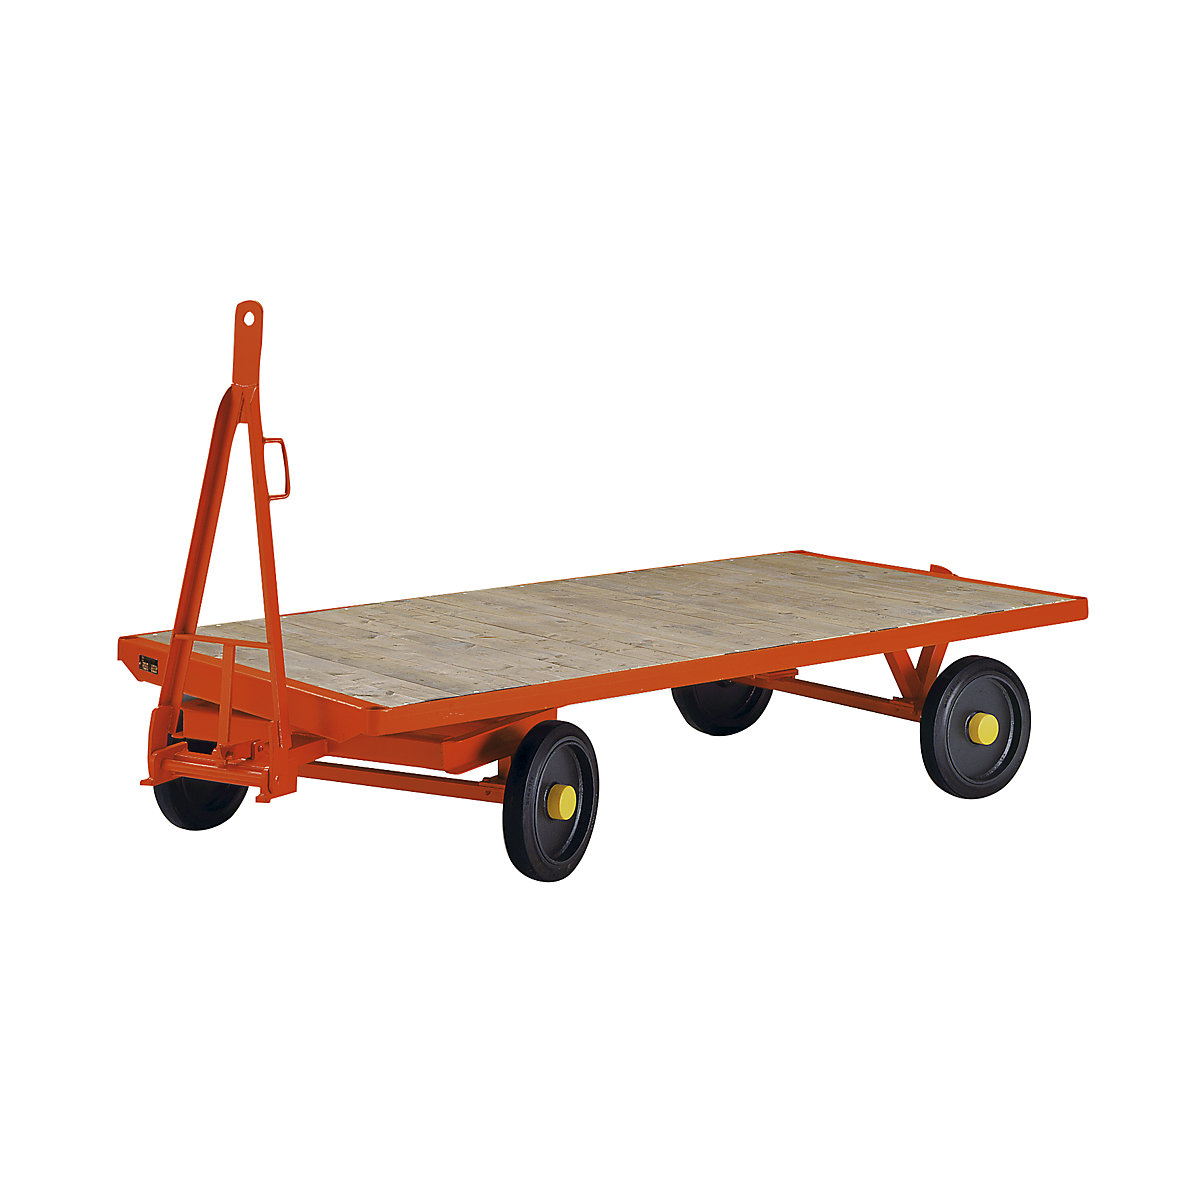 Trailer, 2-wheel turntable steering, max. load 2 t, platform 2.0 x 1.0 m, solid rubber tyres